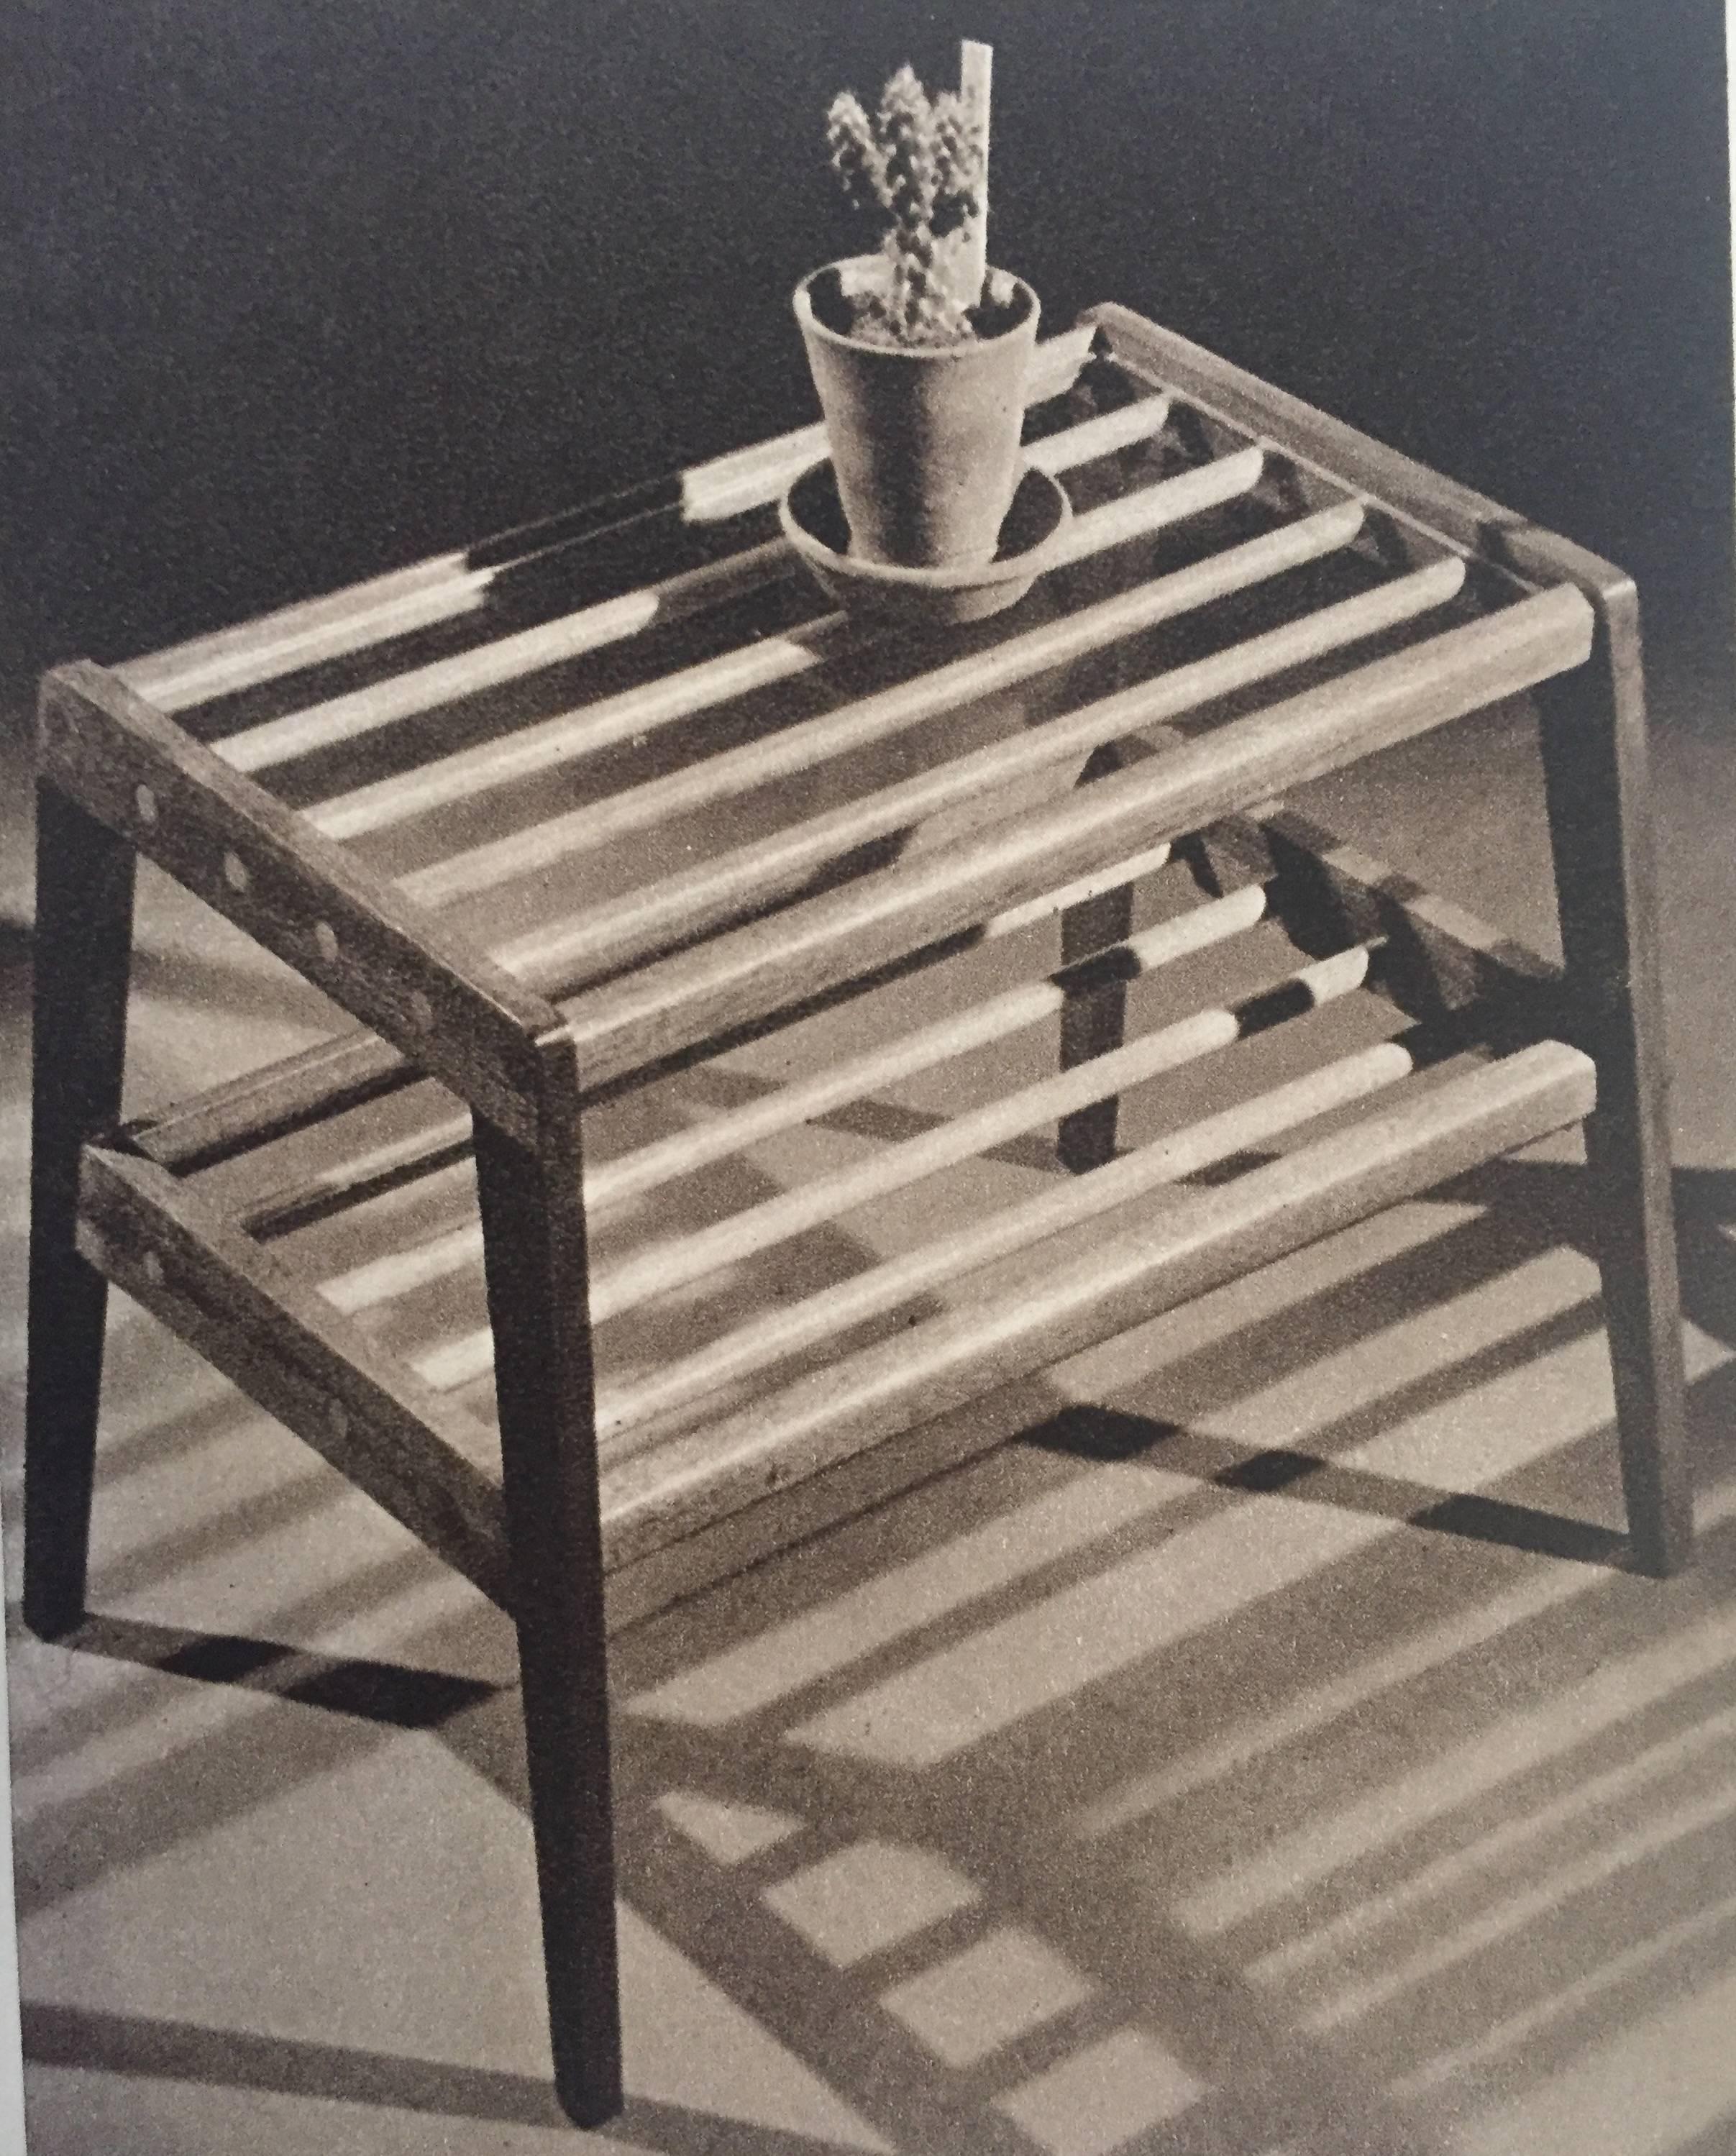 S. H Glenister, Contemporary Design in Woodwork, 1955 4